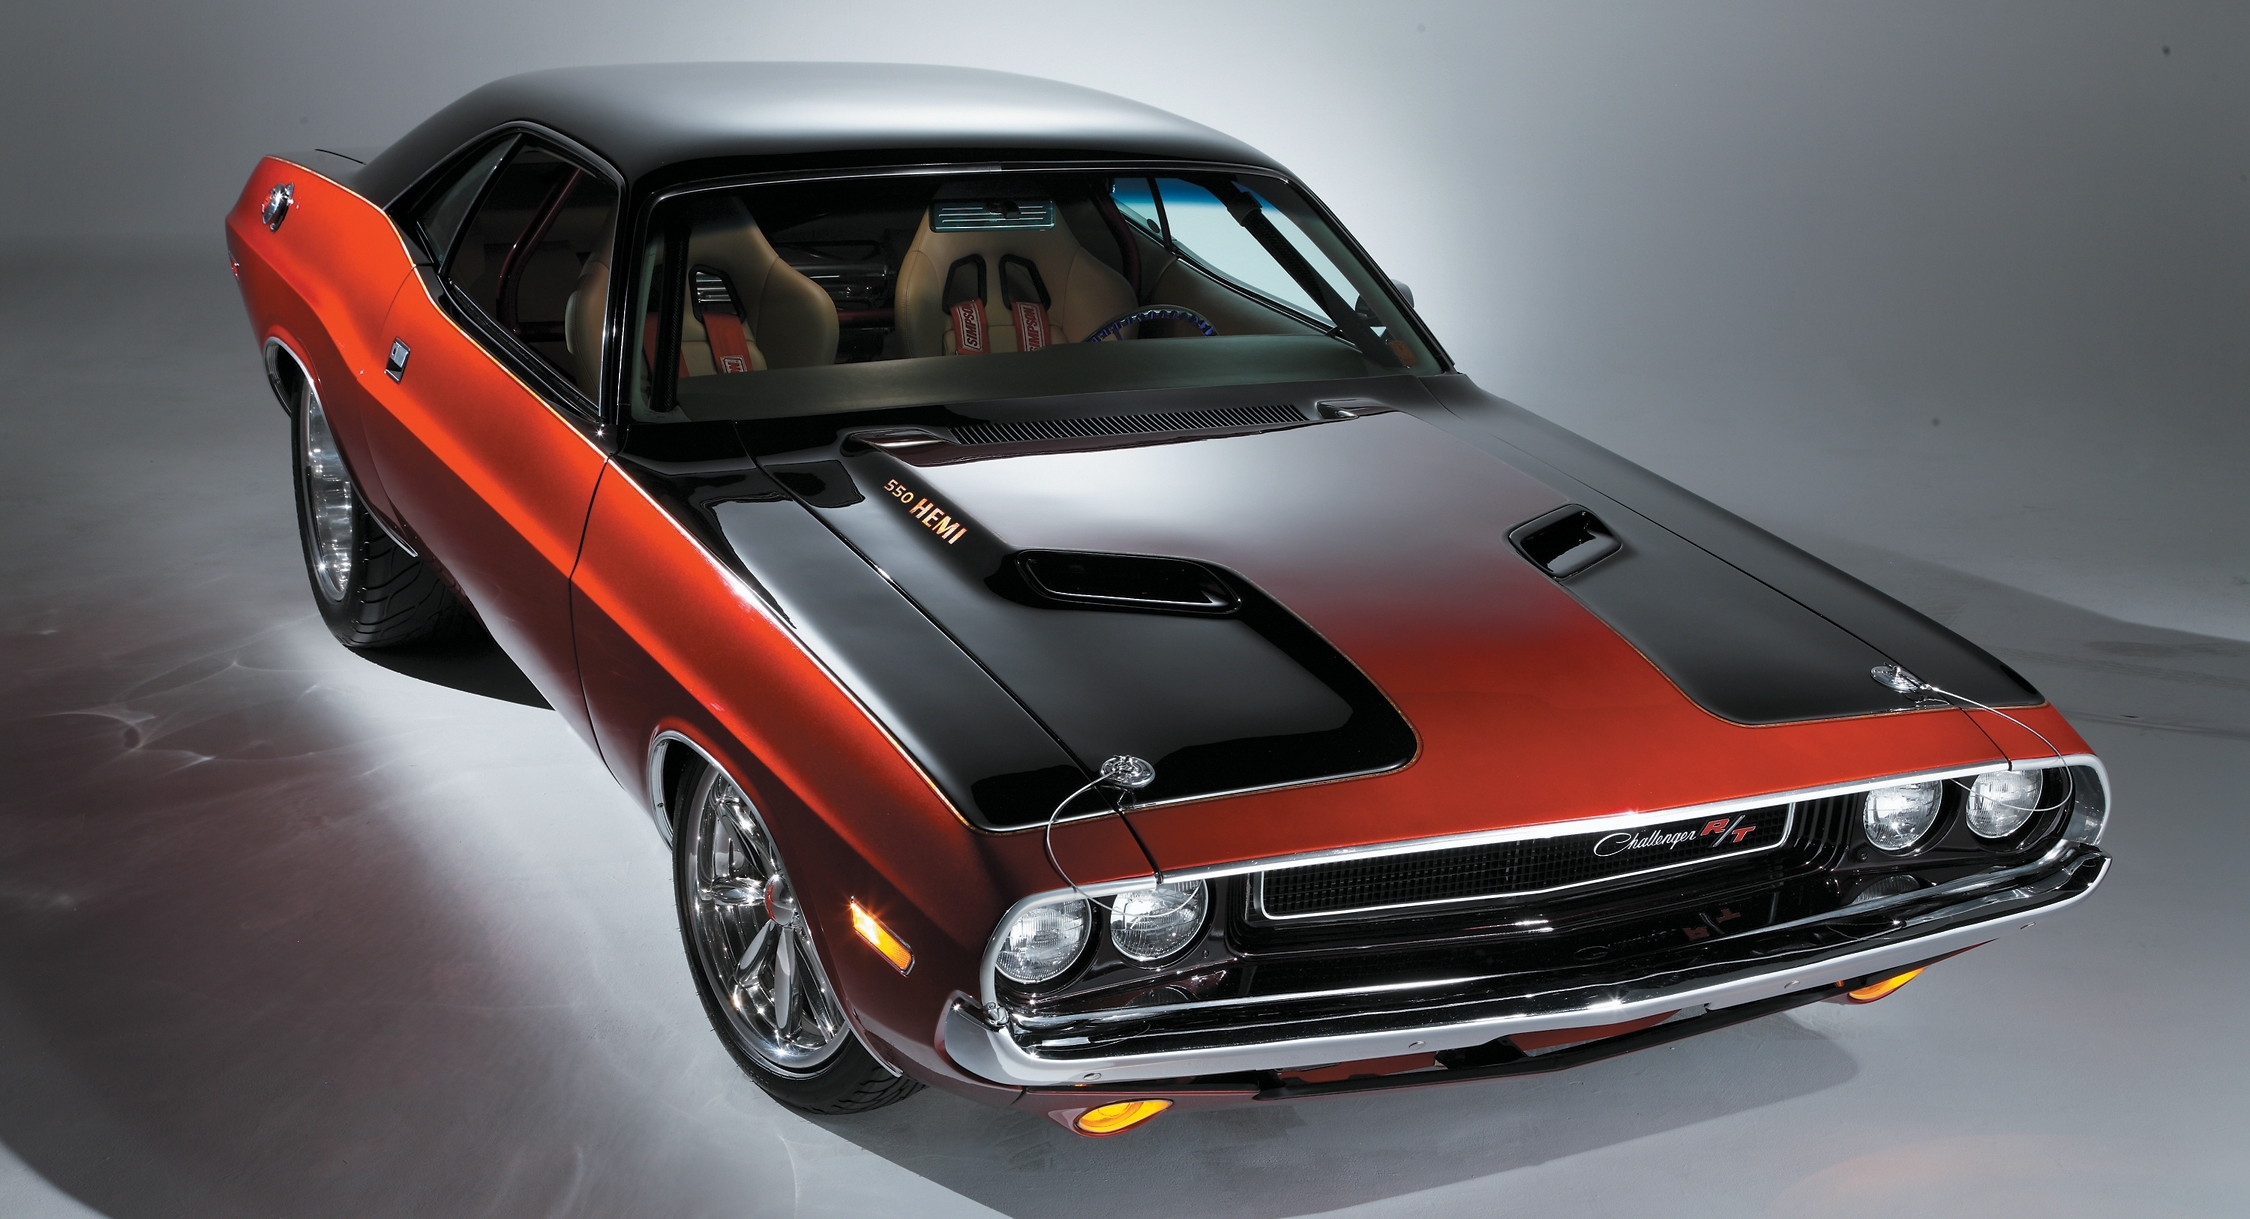 Muscle Cars Wallpaper on Cars Muscle Dodge Challenger R T Hd Wallpaper   Cars   Trucks   607039